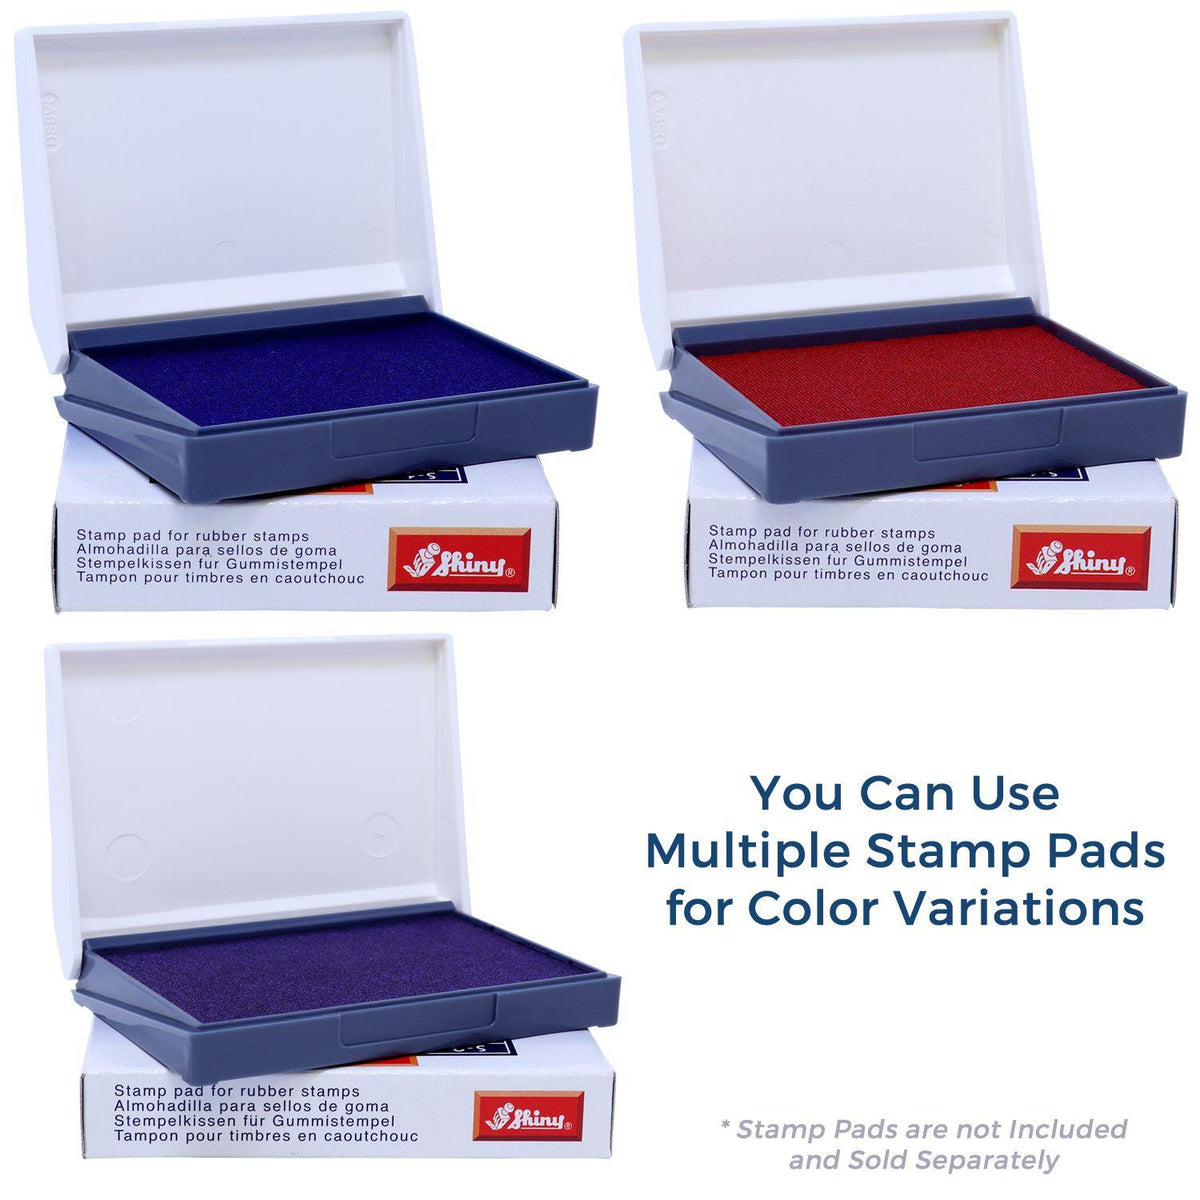 Stamp Pads for Large First Class Rubber Stamp Available